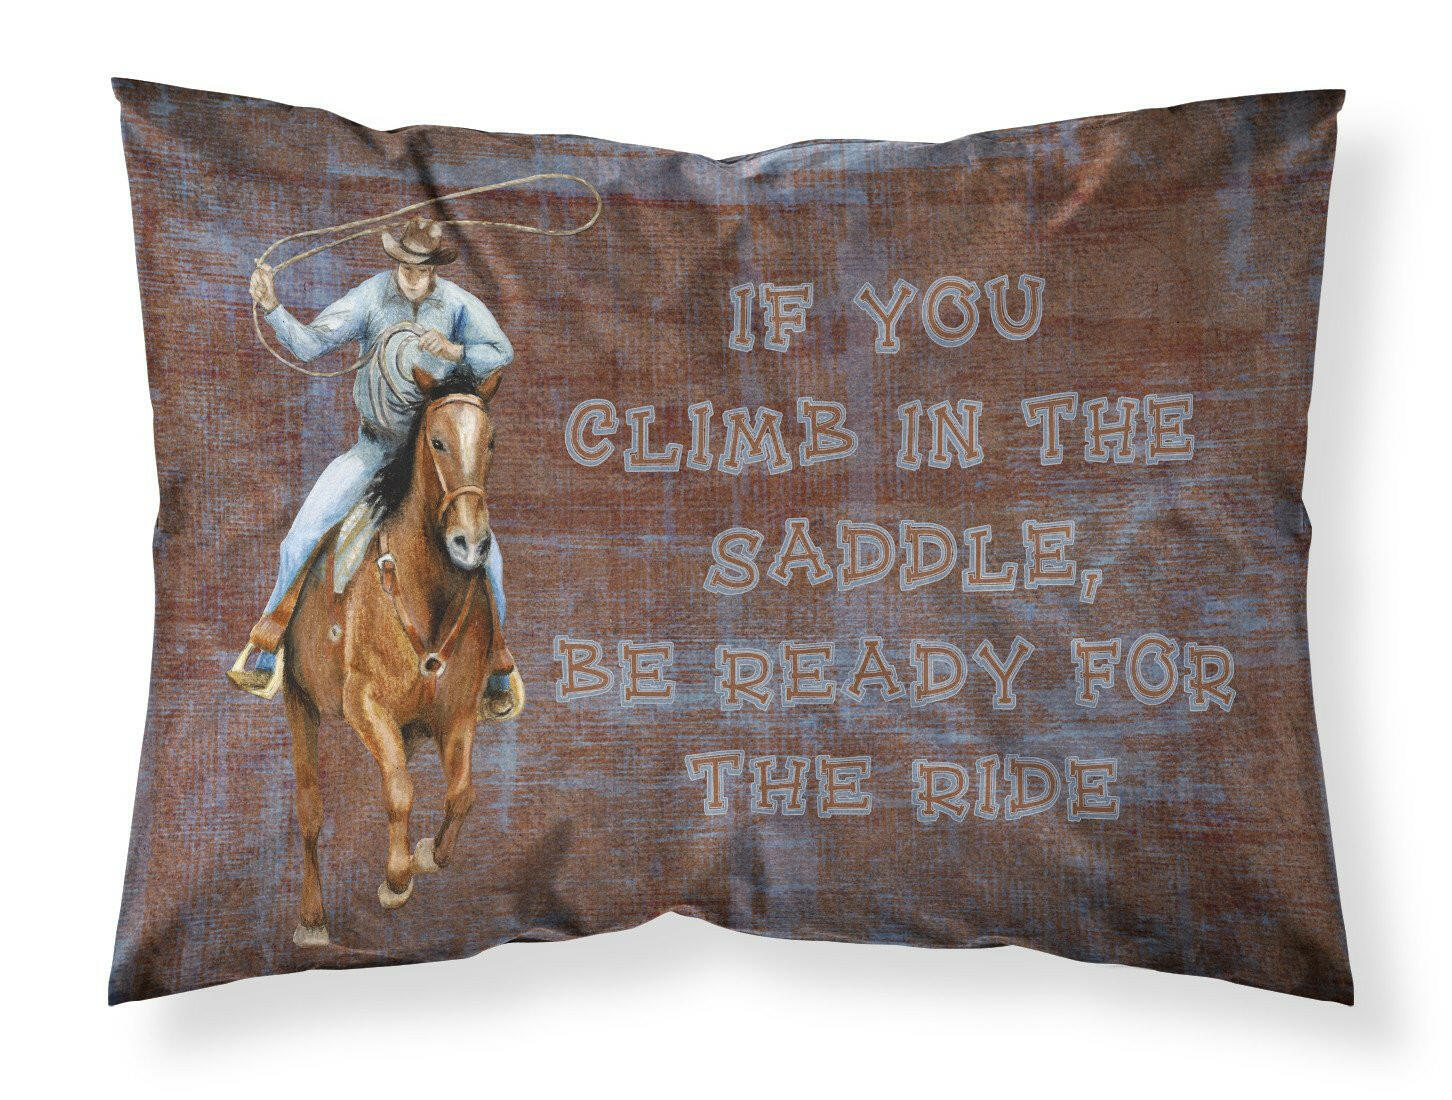 Roper Horse If you climb in the saddle, be ready for the ride Fabric Standard Pillowcase SB3061PILLOWCASE by Caroline's Treasures